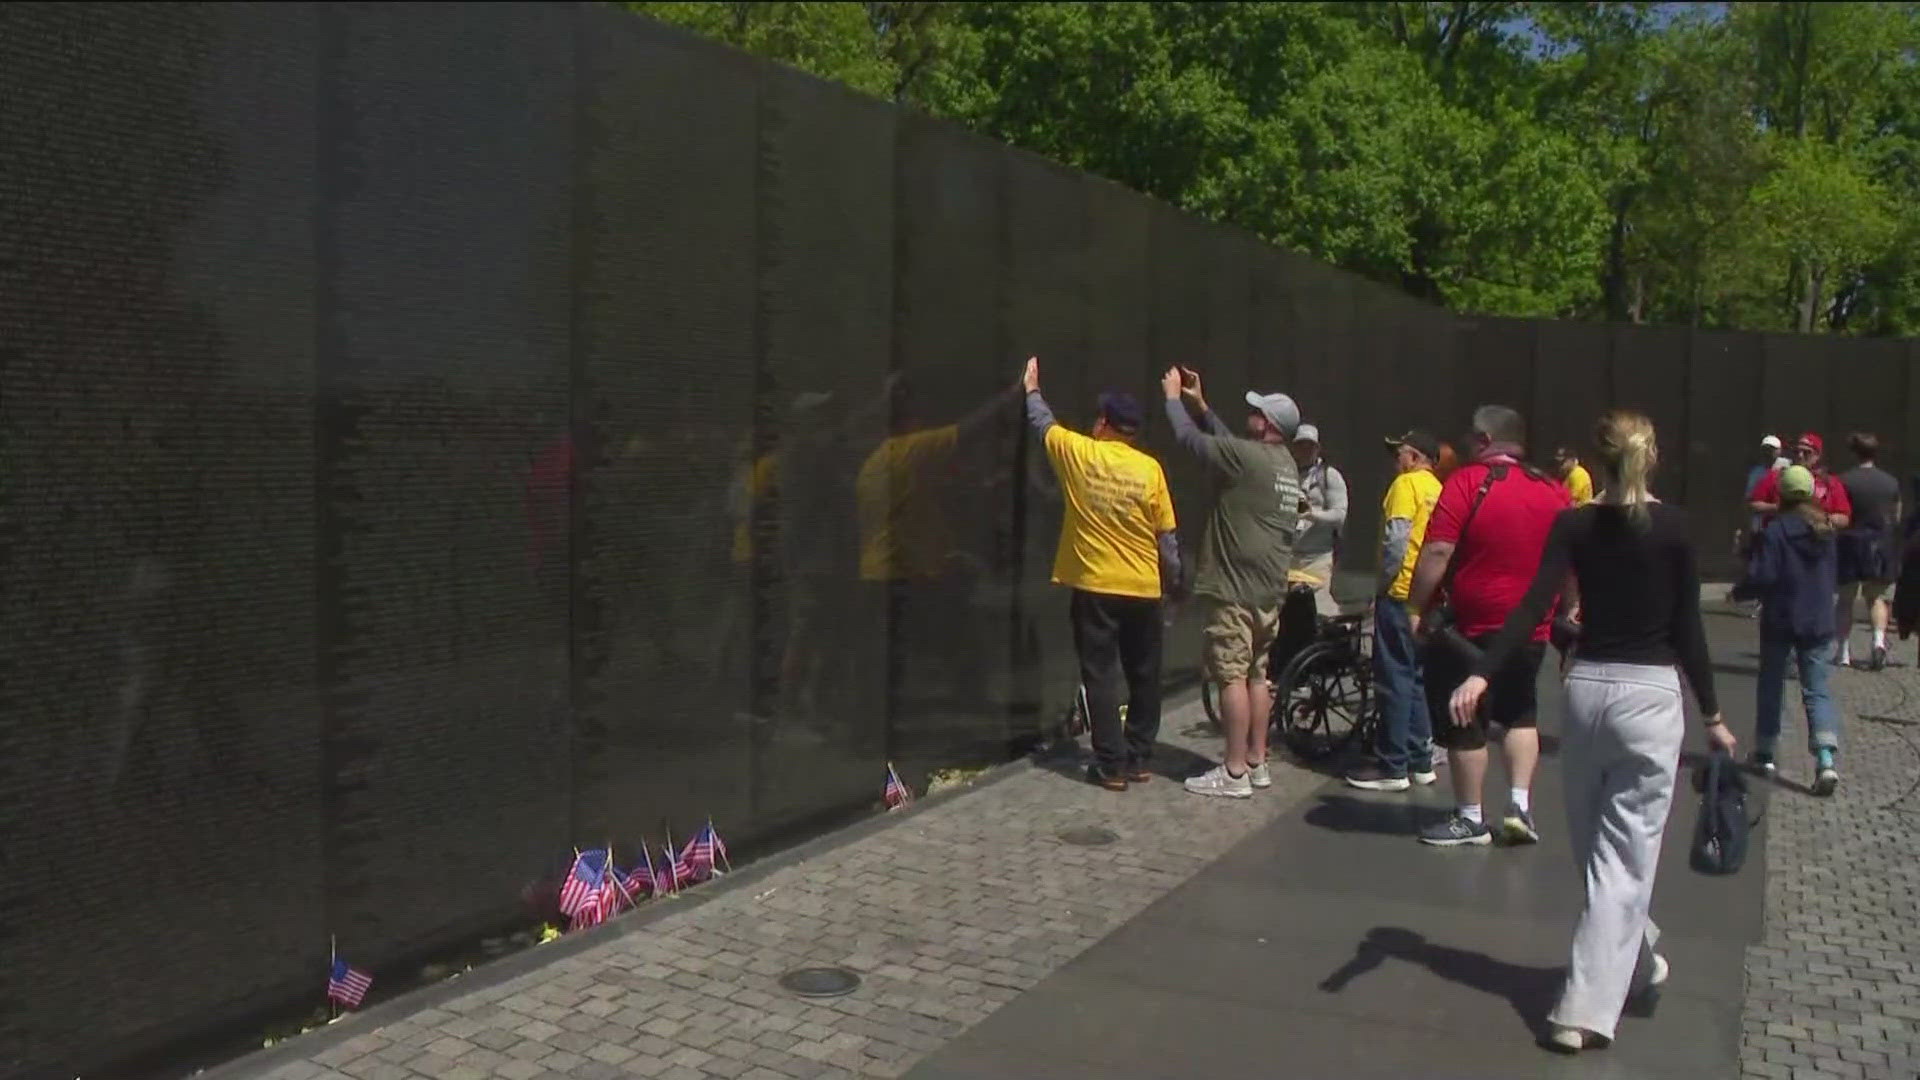 Flag City Honor Flight gives local veterans a chance to see memorials in their honor in Washington, D.C. WTOL 11's Dan Cummins also made the trip to D.C. with them.